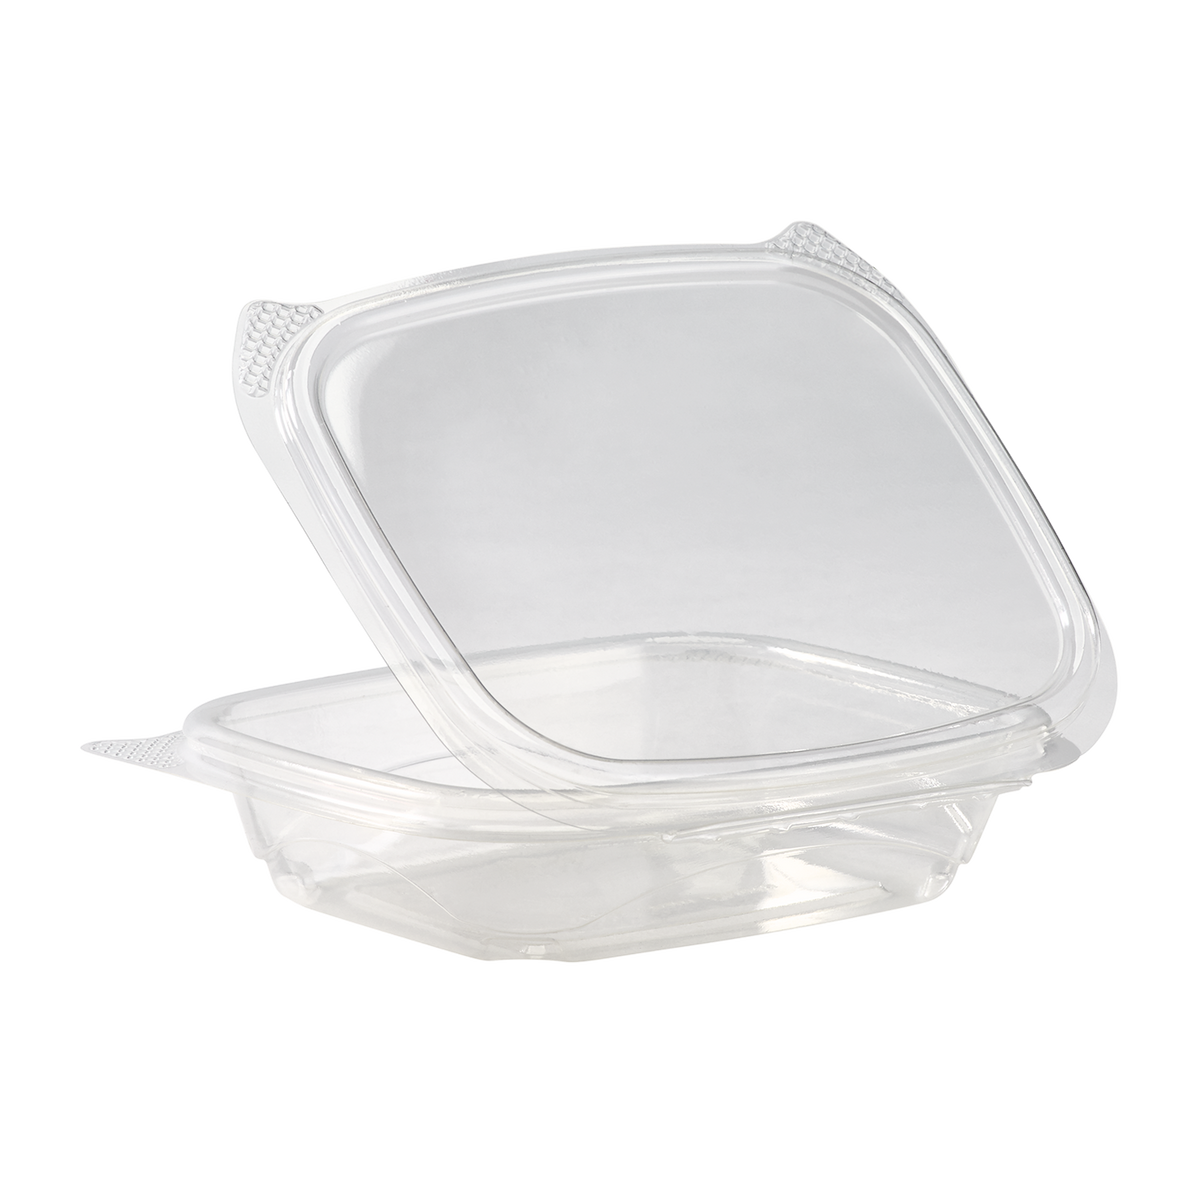 https://www.restaurantsupplydrops.shop/wp-content/uploads/1689/33/shop-at-8oz-hinged-deli-containers-small-hinged-deli-box-200-count-karat-today-you-can-shop-the-latest-fashions-and-brand-names-online_3.png